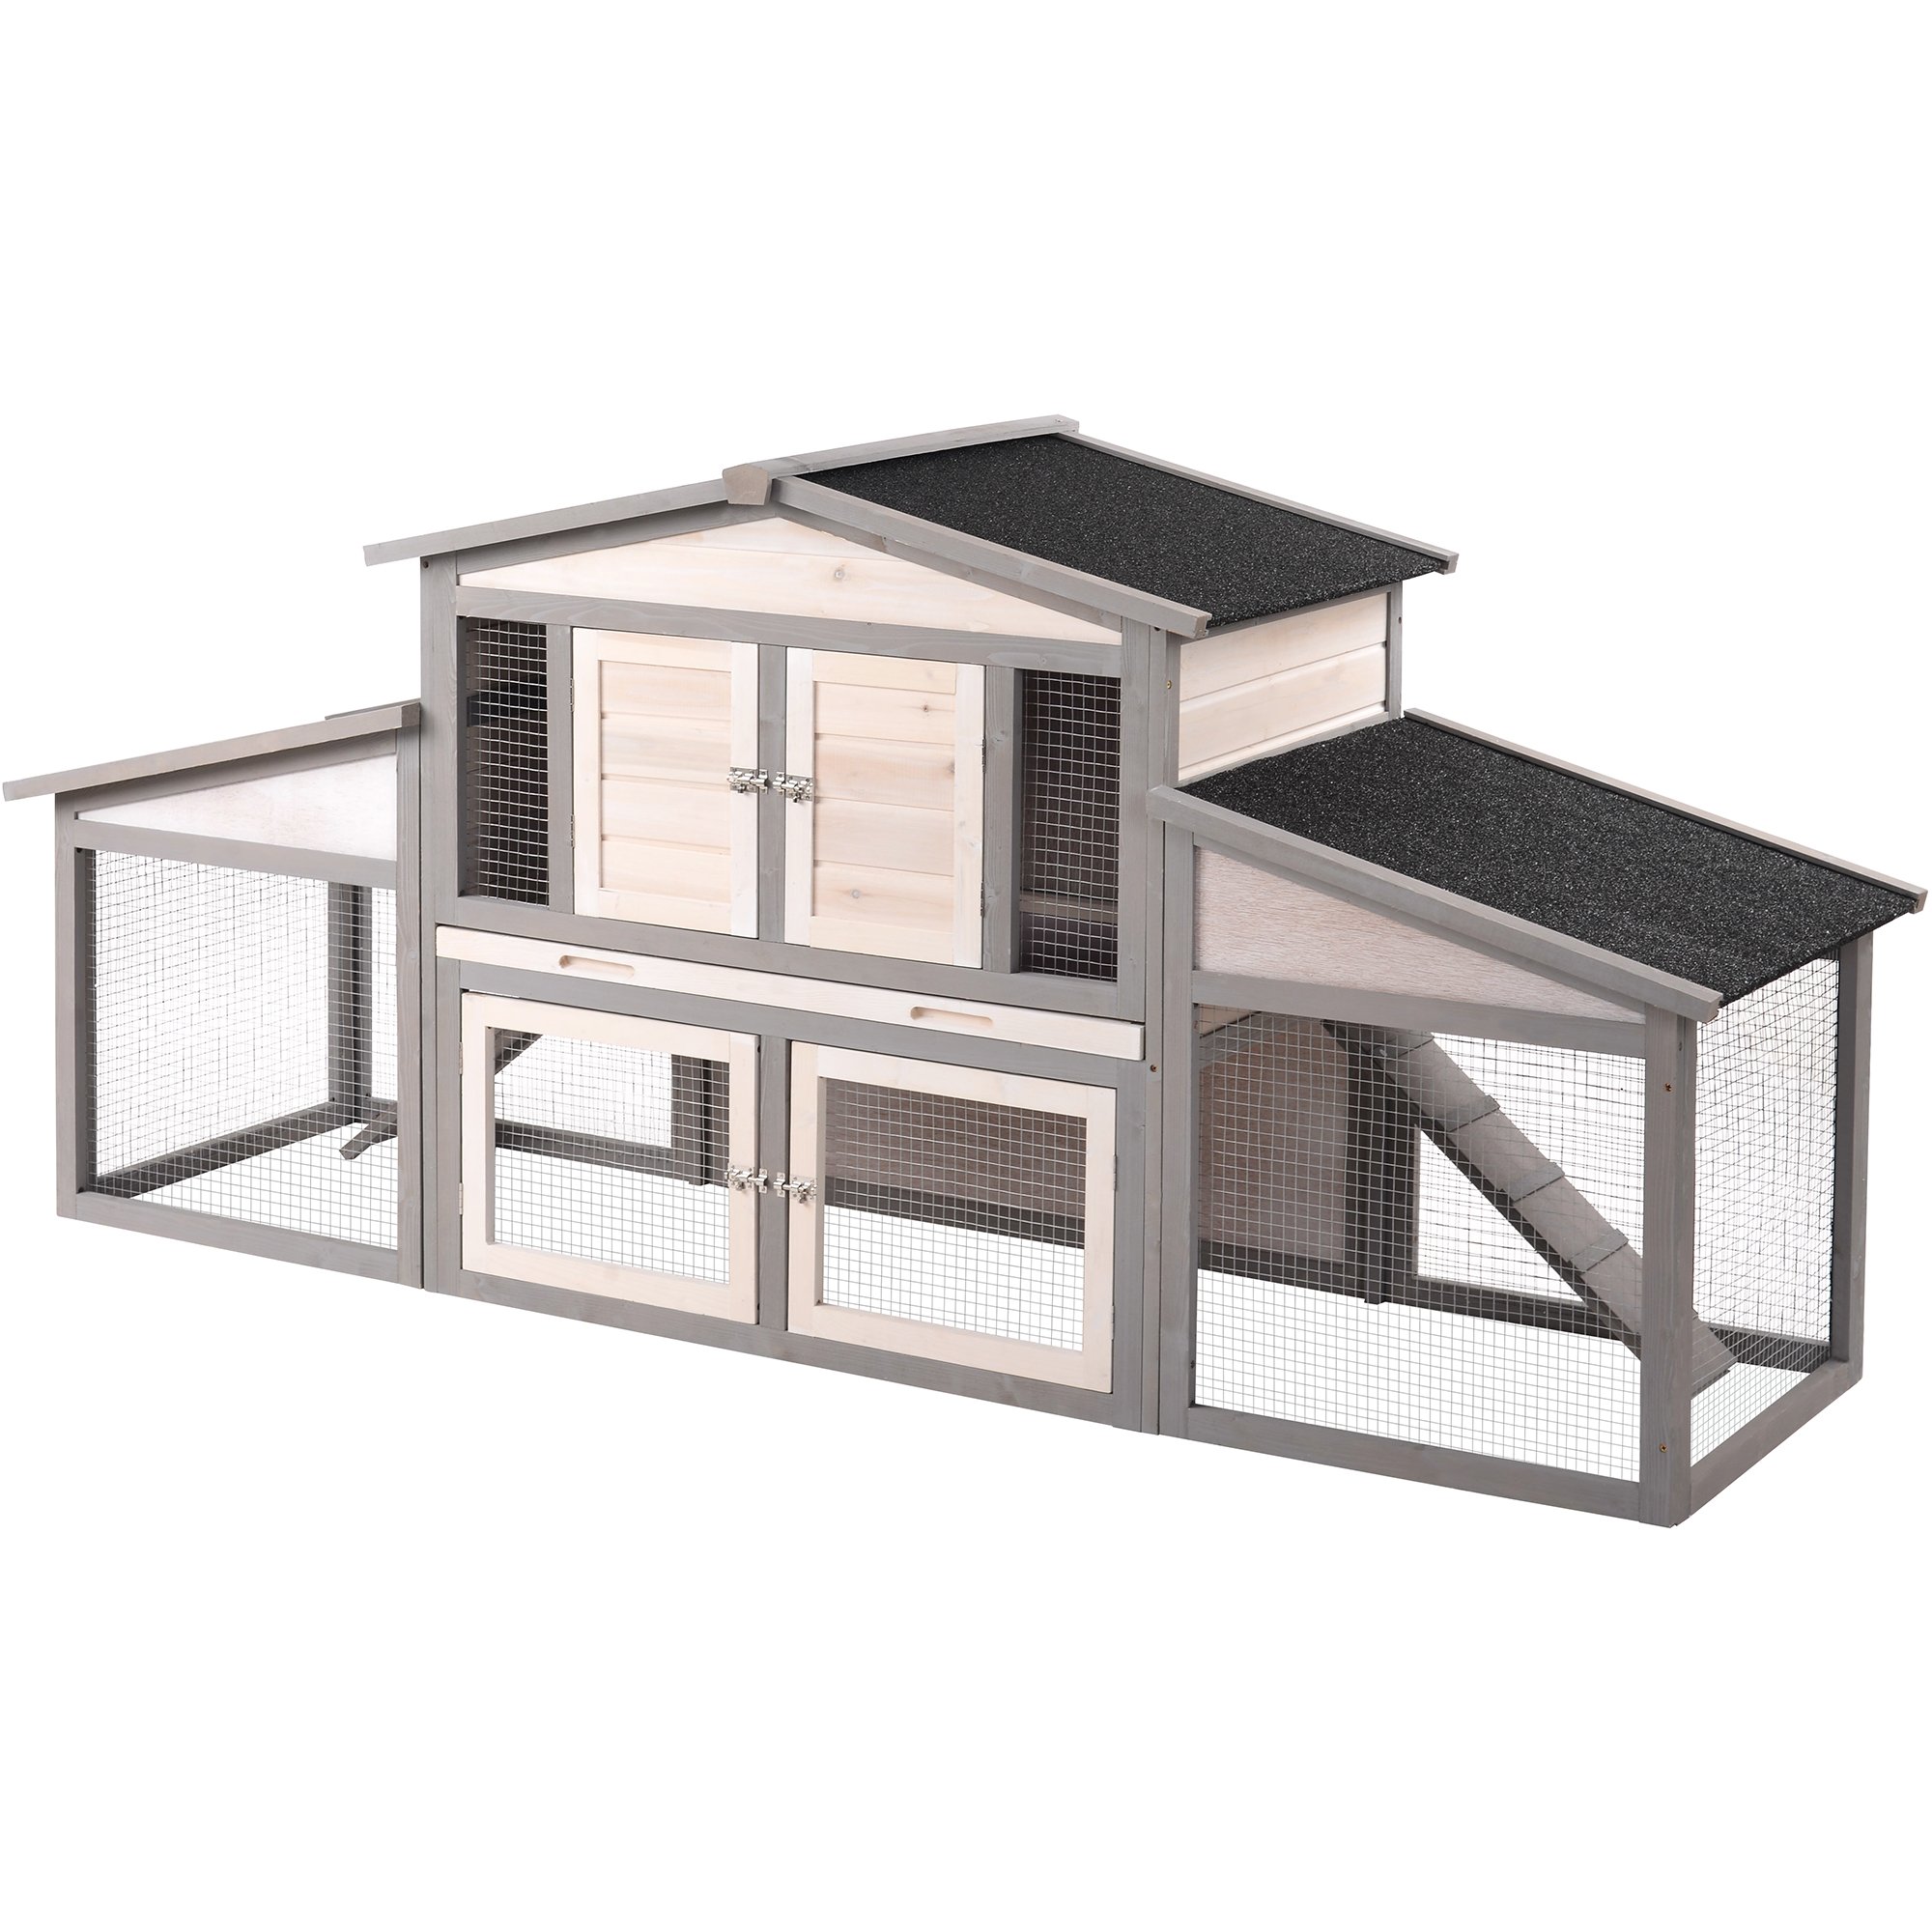 88.2" Upgraded Large Wooden Chicken Coop Rabbit Hutch Small Animal House with Tray and 2 Ramps, Gray+White-CASAINC